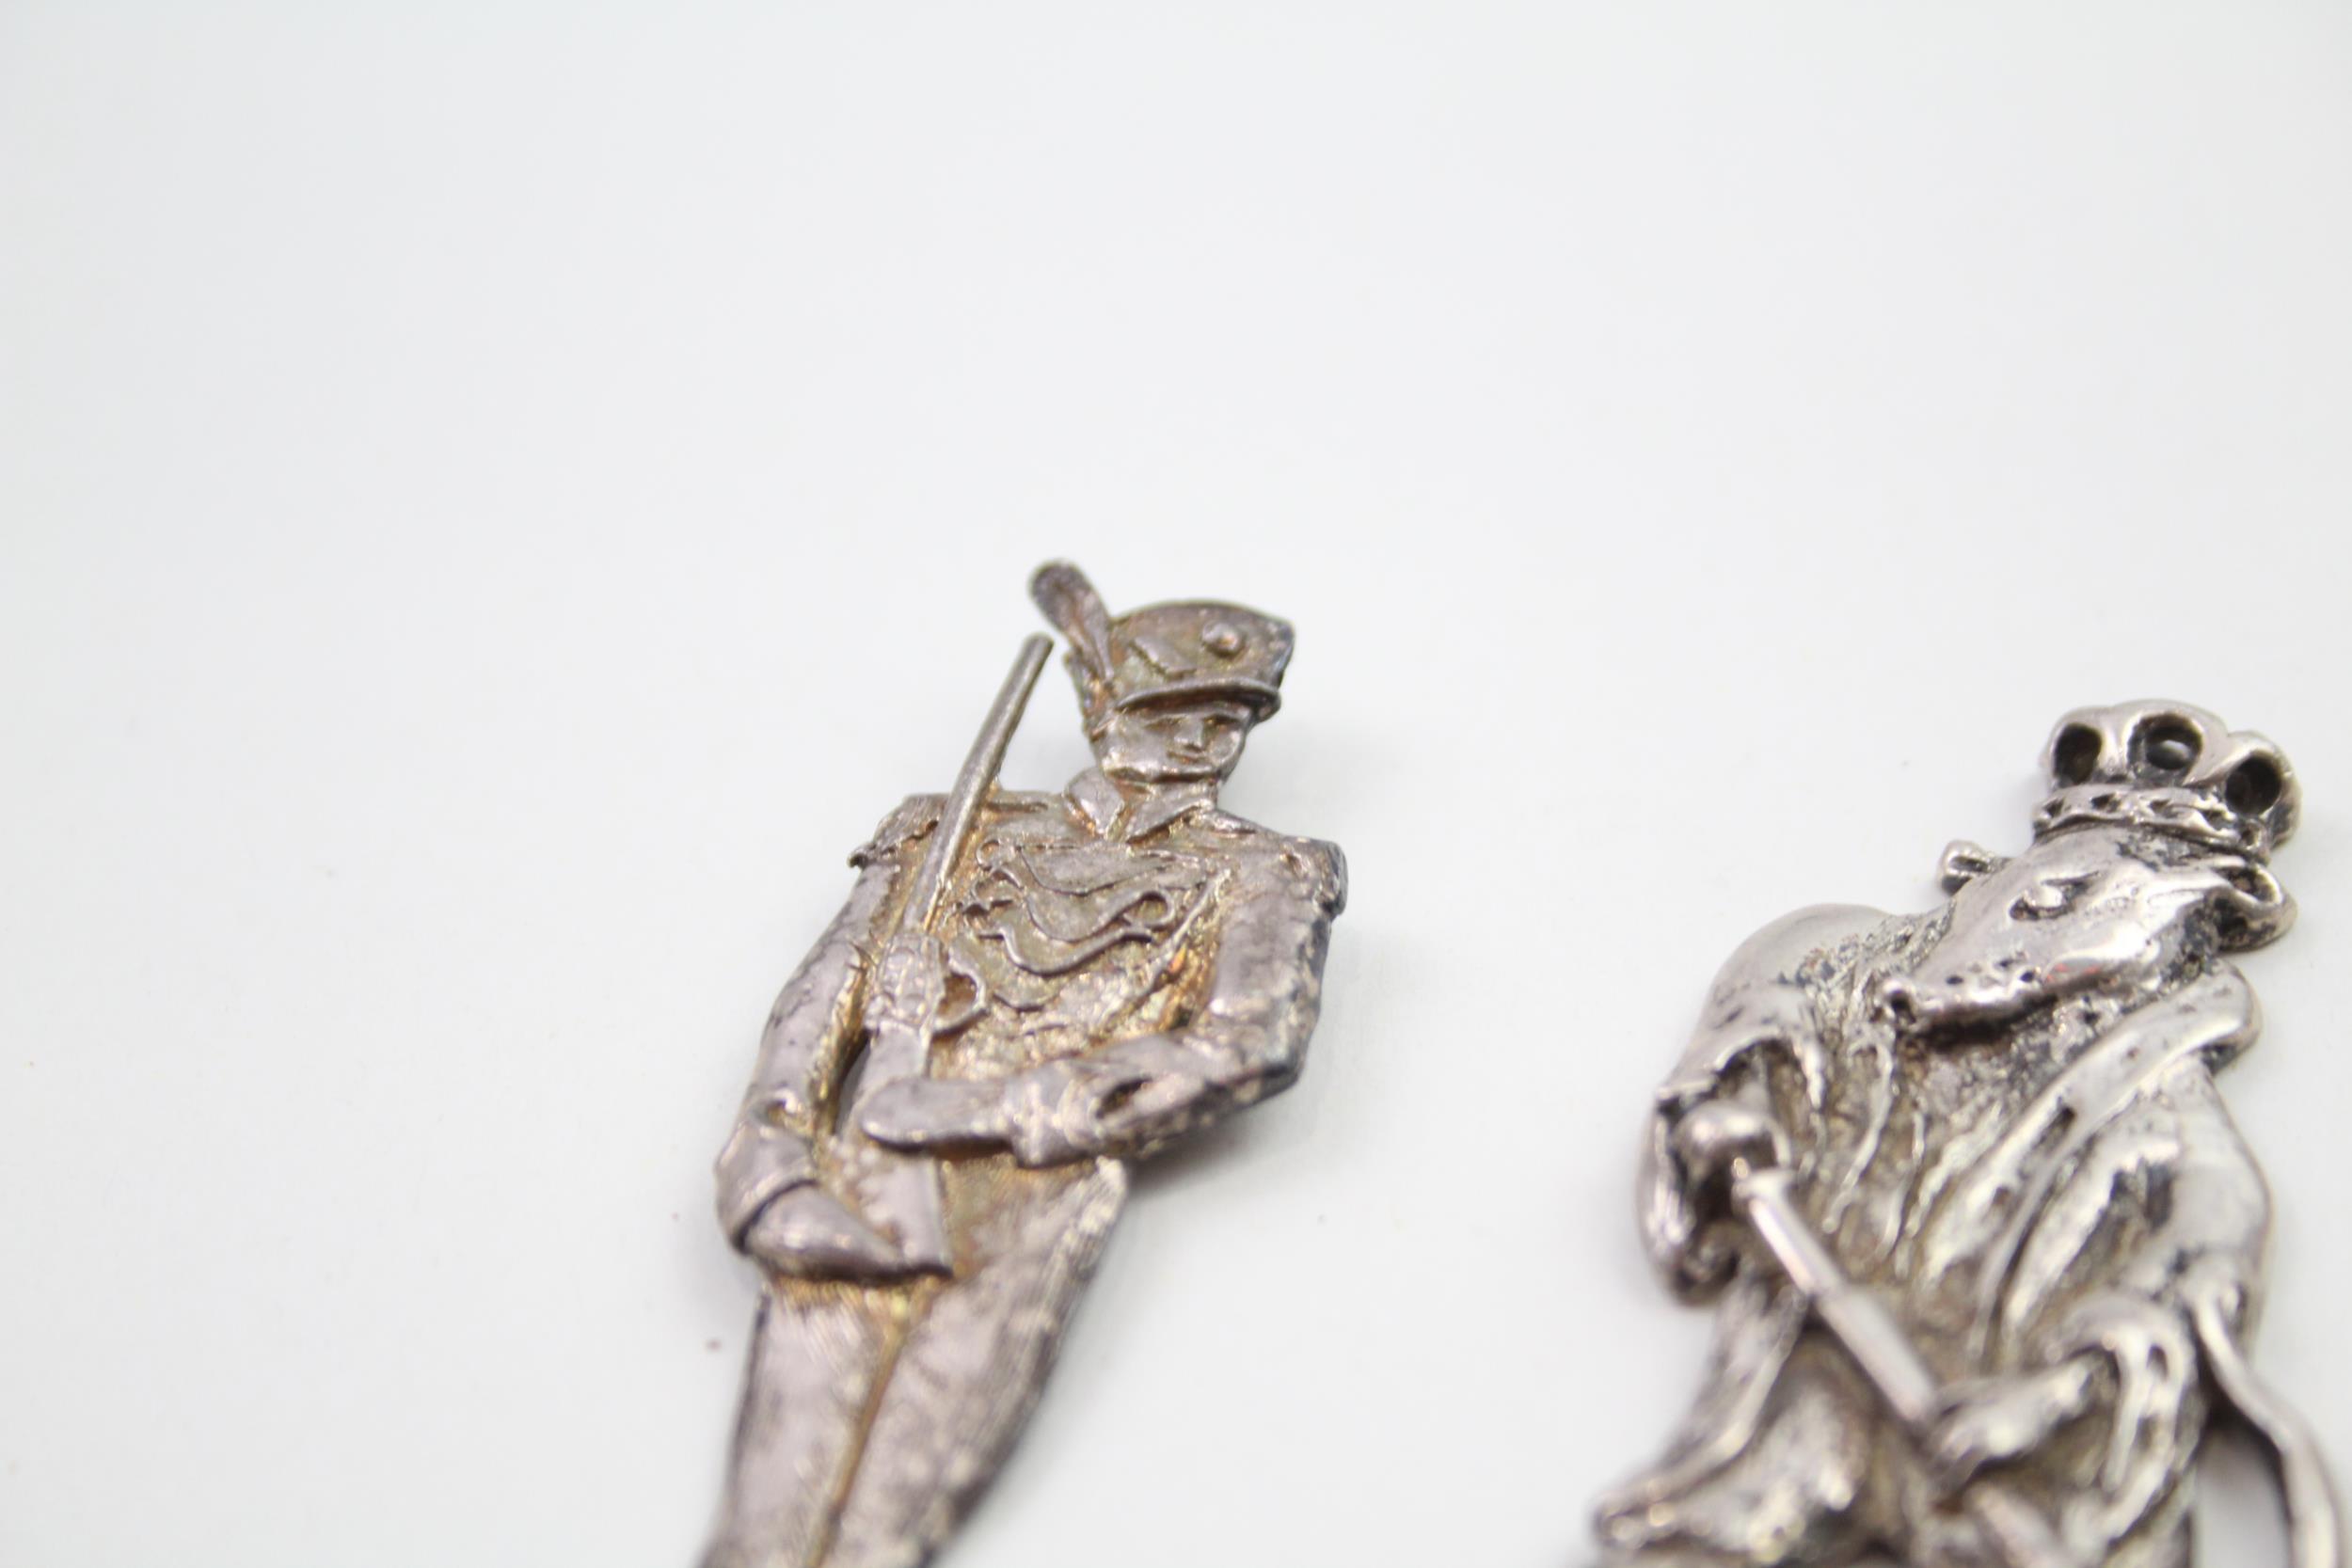 3 x Vintage .925 Sterling Silver Novelty Portrait Ornaments Inc Soldier 35g - Approx Height - 6. - Image 2 of 7